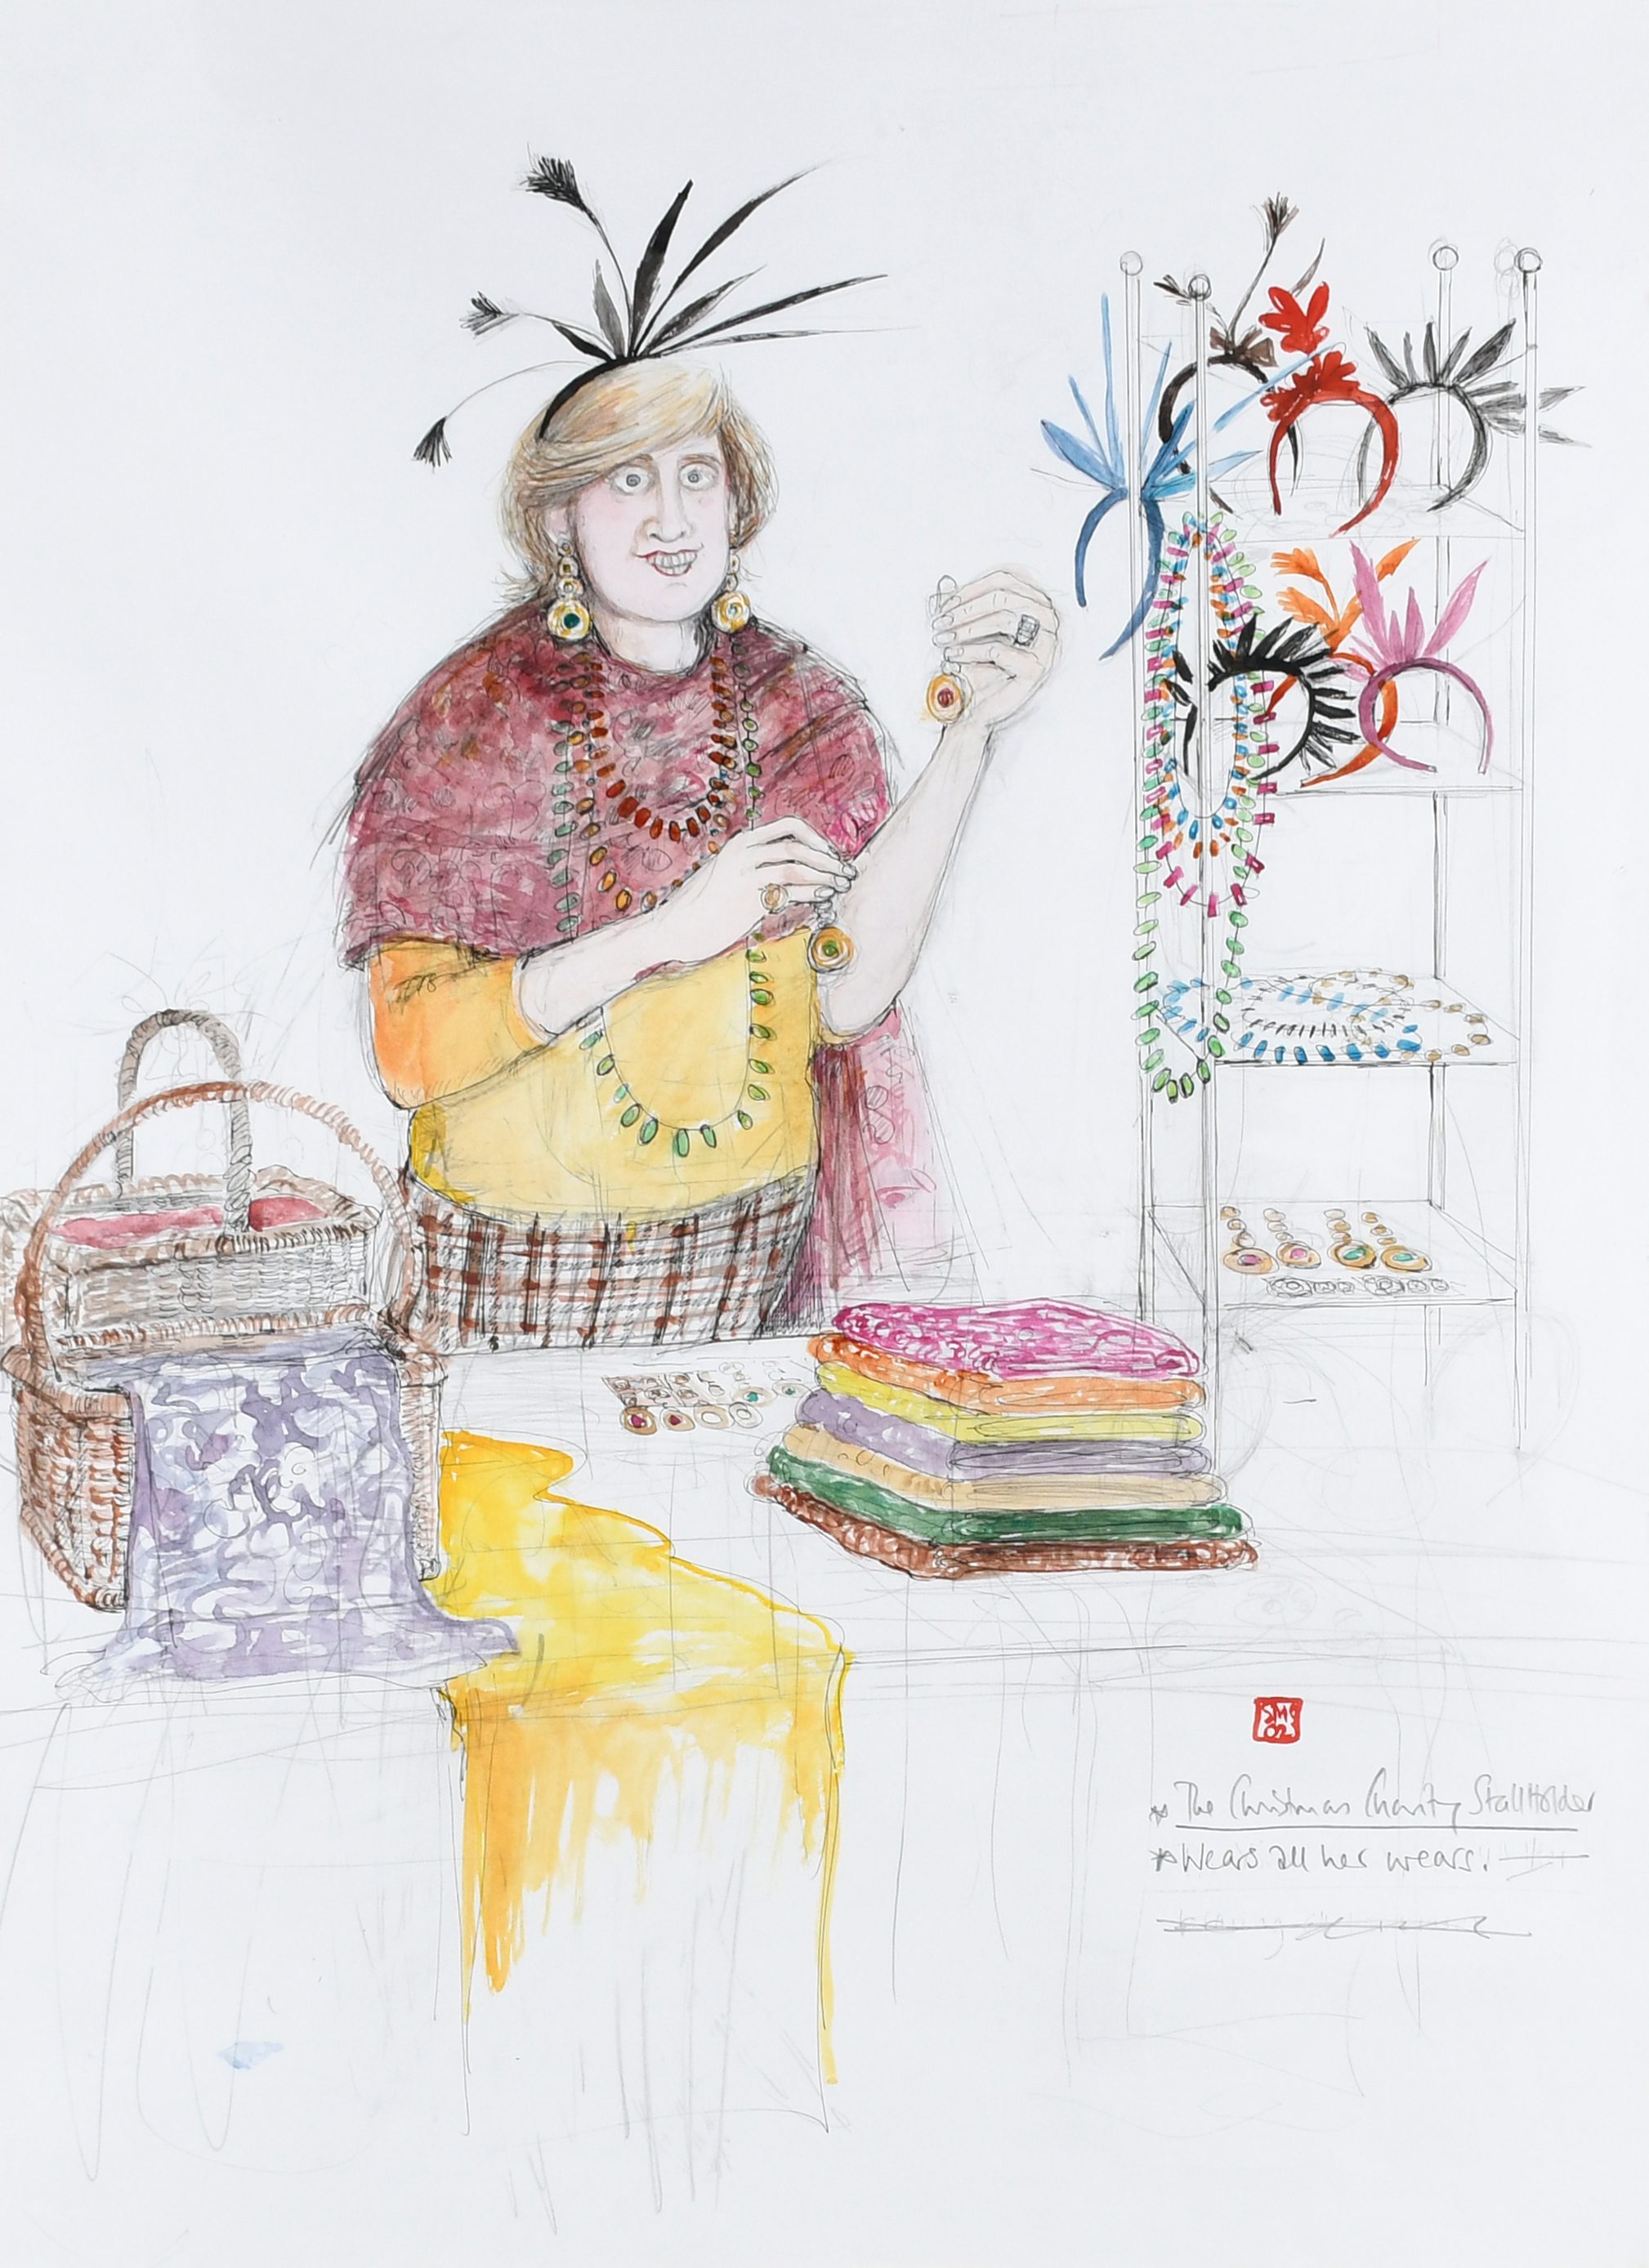 ‡Sue Macartney-Snape (b.1957) The Christmas Charity Stallholder Wears All Her Wears Signed with